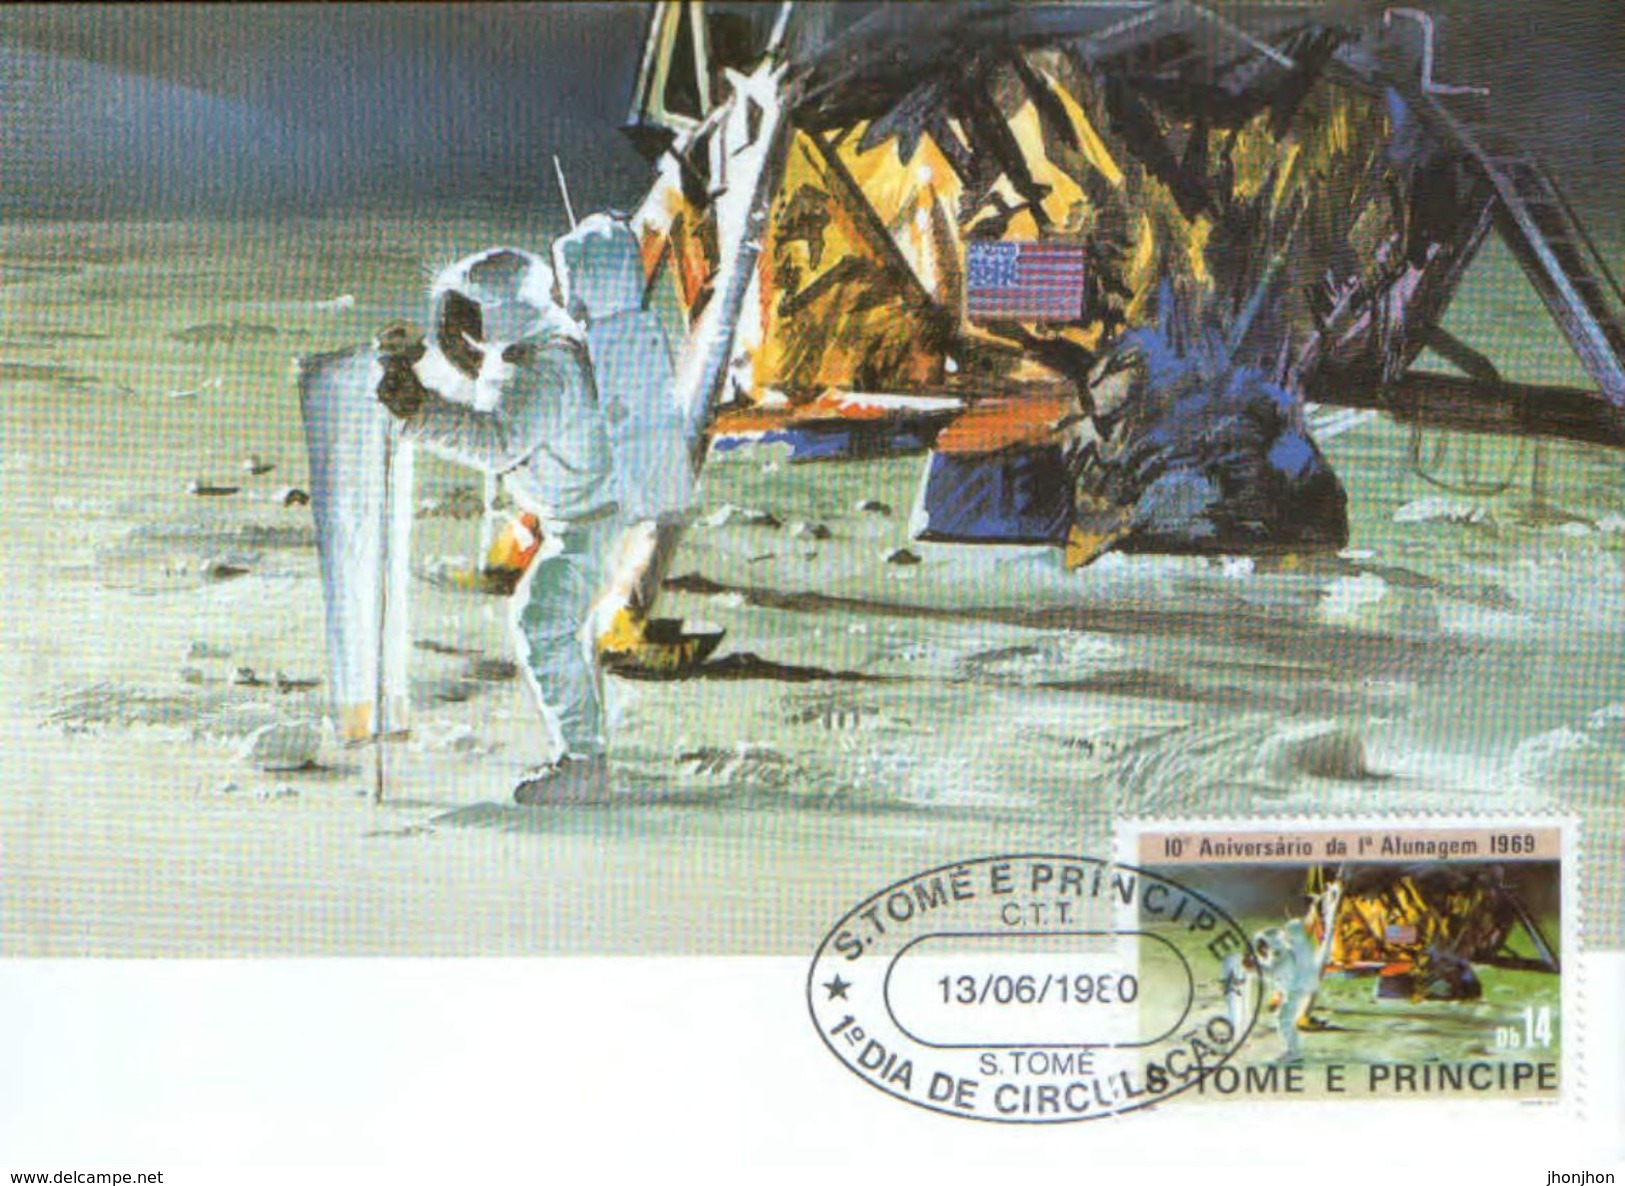 SaoTome E Principe-Maximum Postcards Set/5 1983 -The Moon Landing -10 Years From The First Step Of The Man On The Moon - Africa